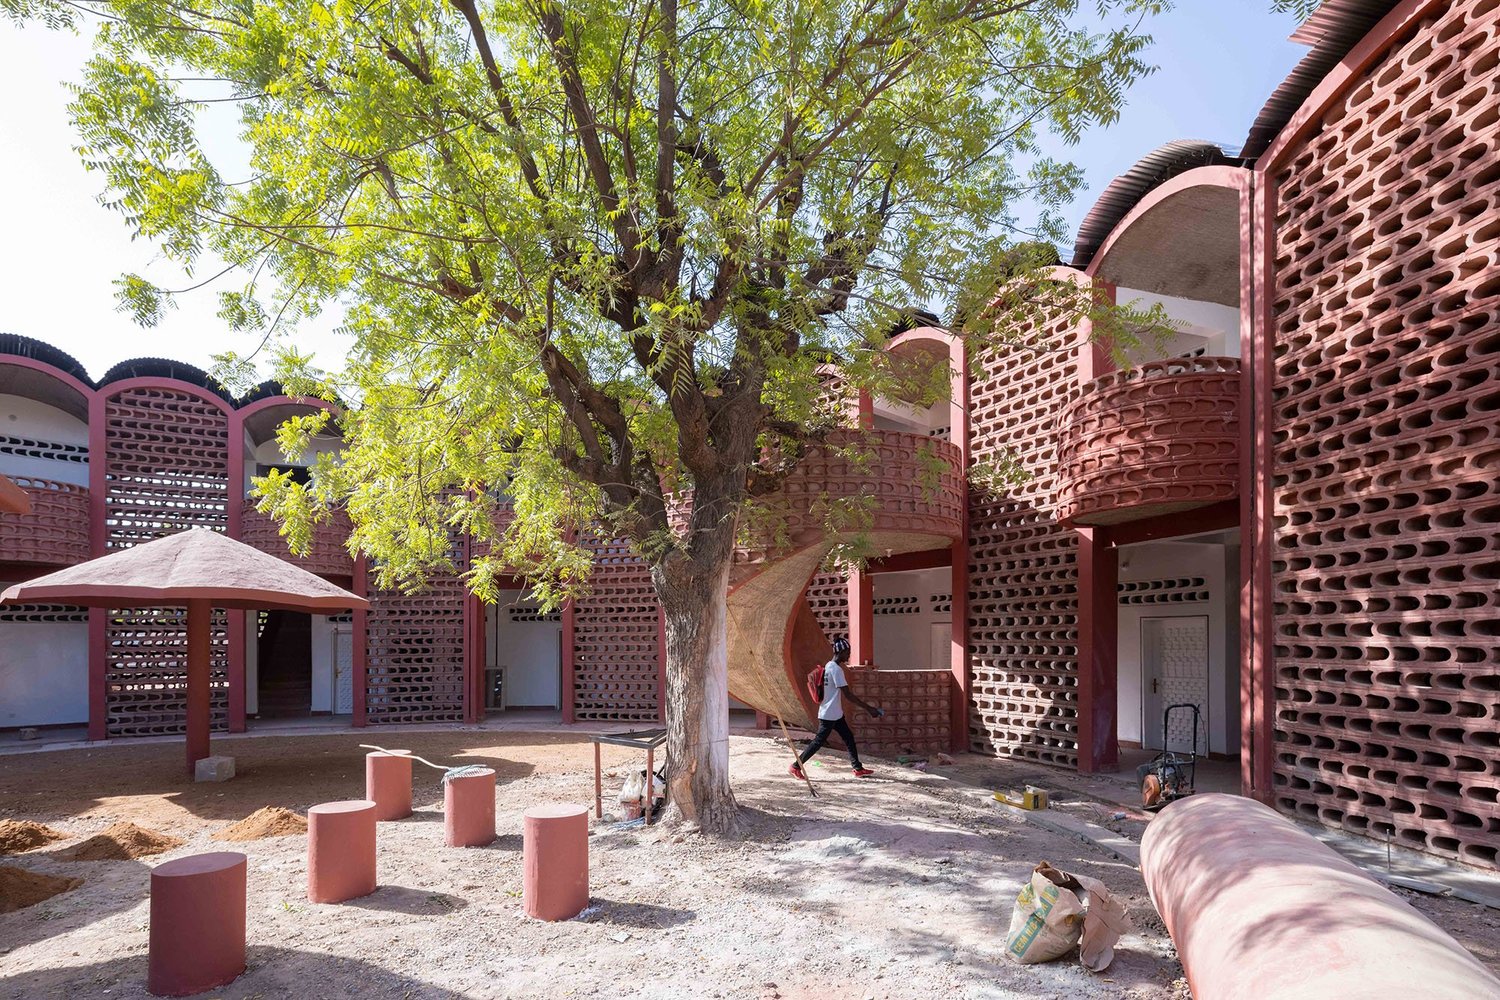 Maternity and Paediatric Hospital in Tambacounda, Senegal, by Manuel Herz Photo: Iwan Baan Courtesy of the Josef and Anni Albers Foundation and Le Korsa